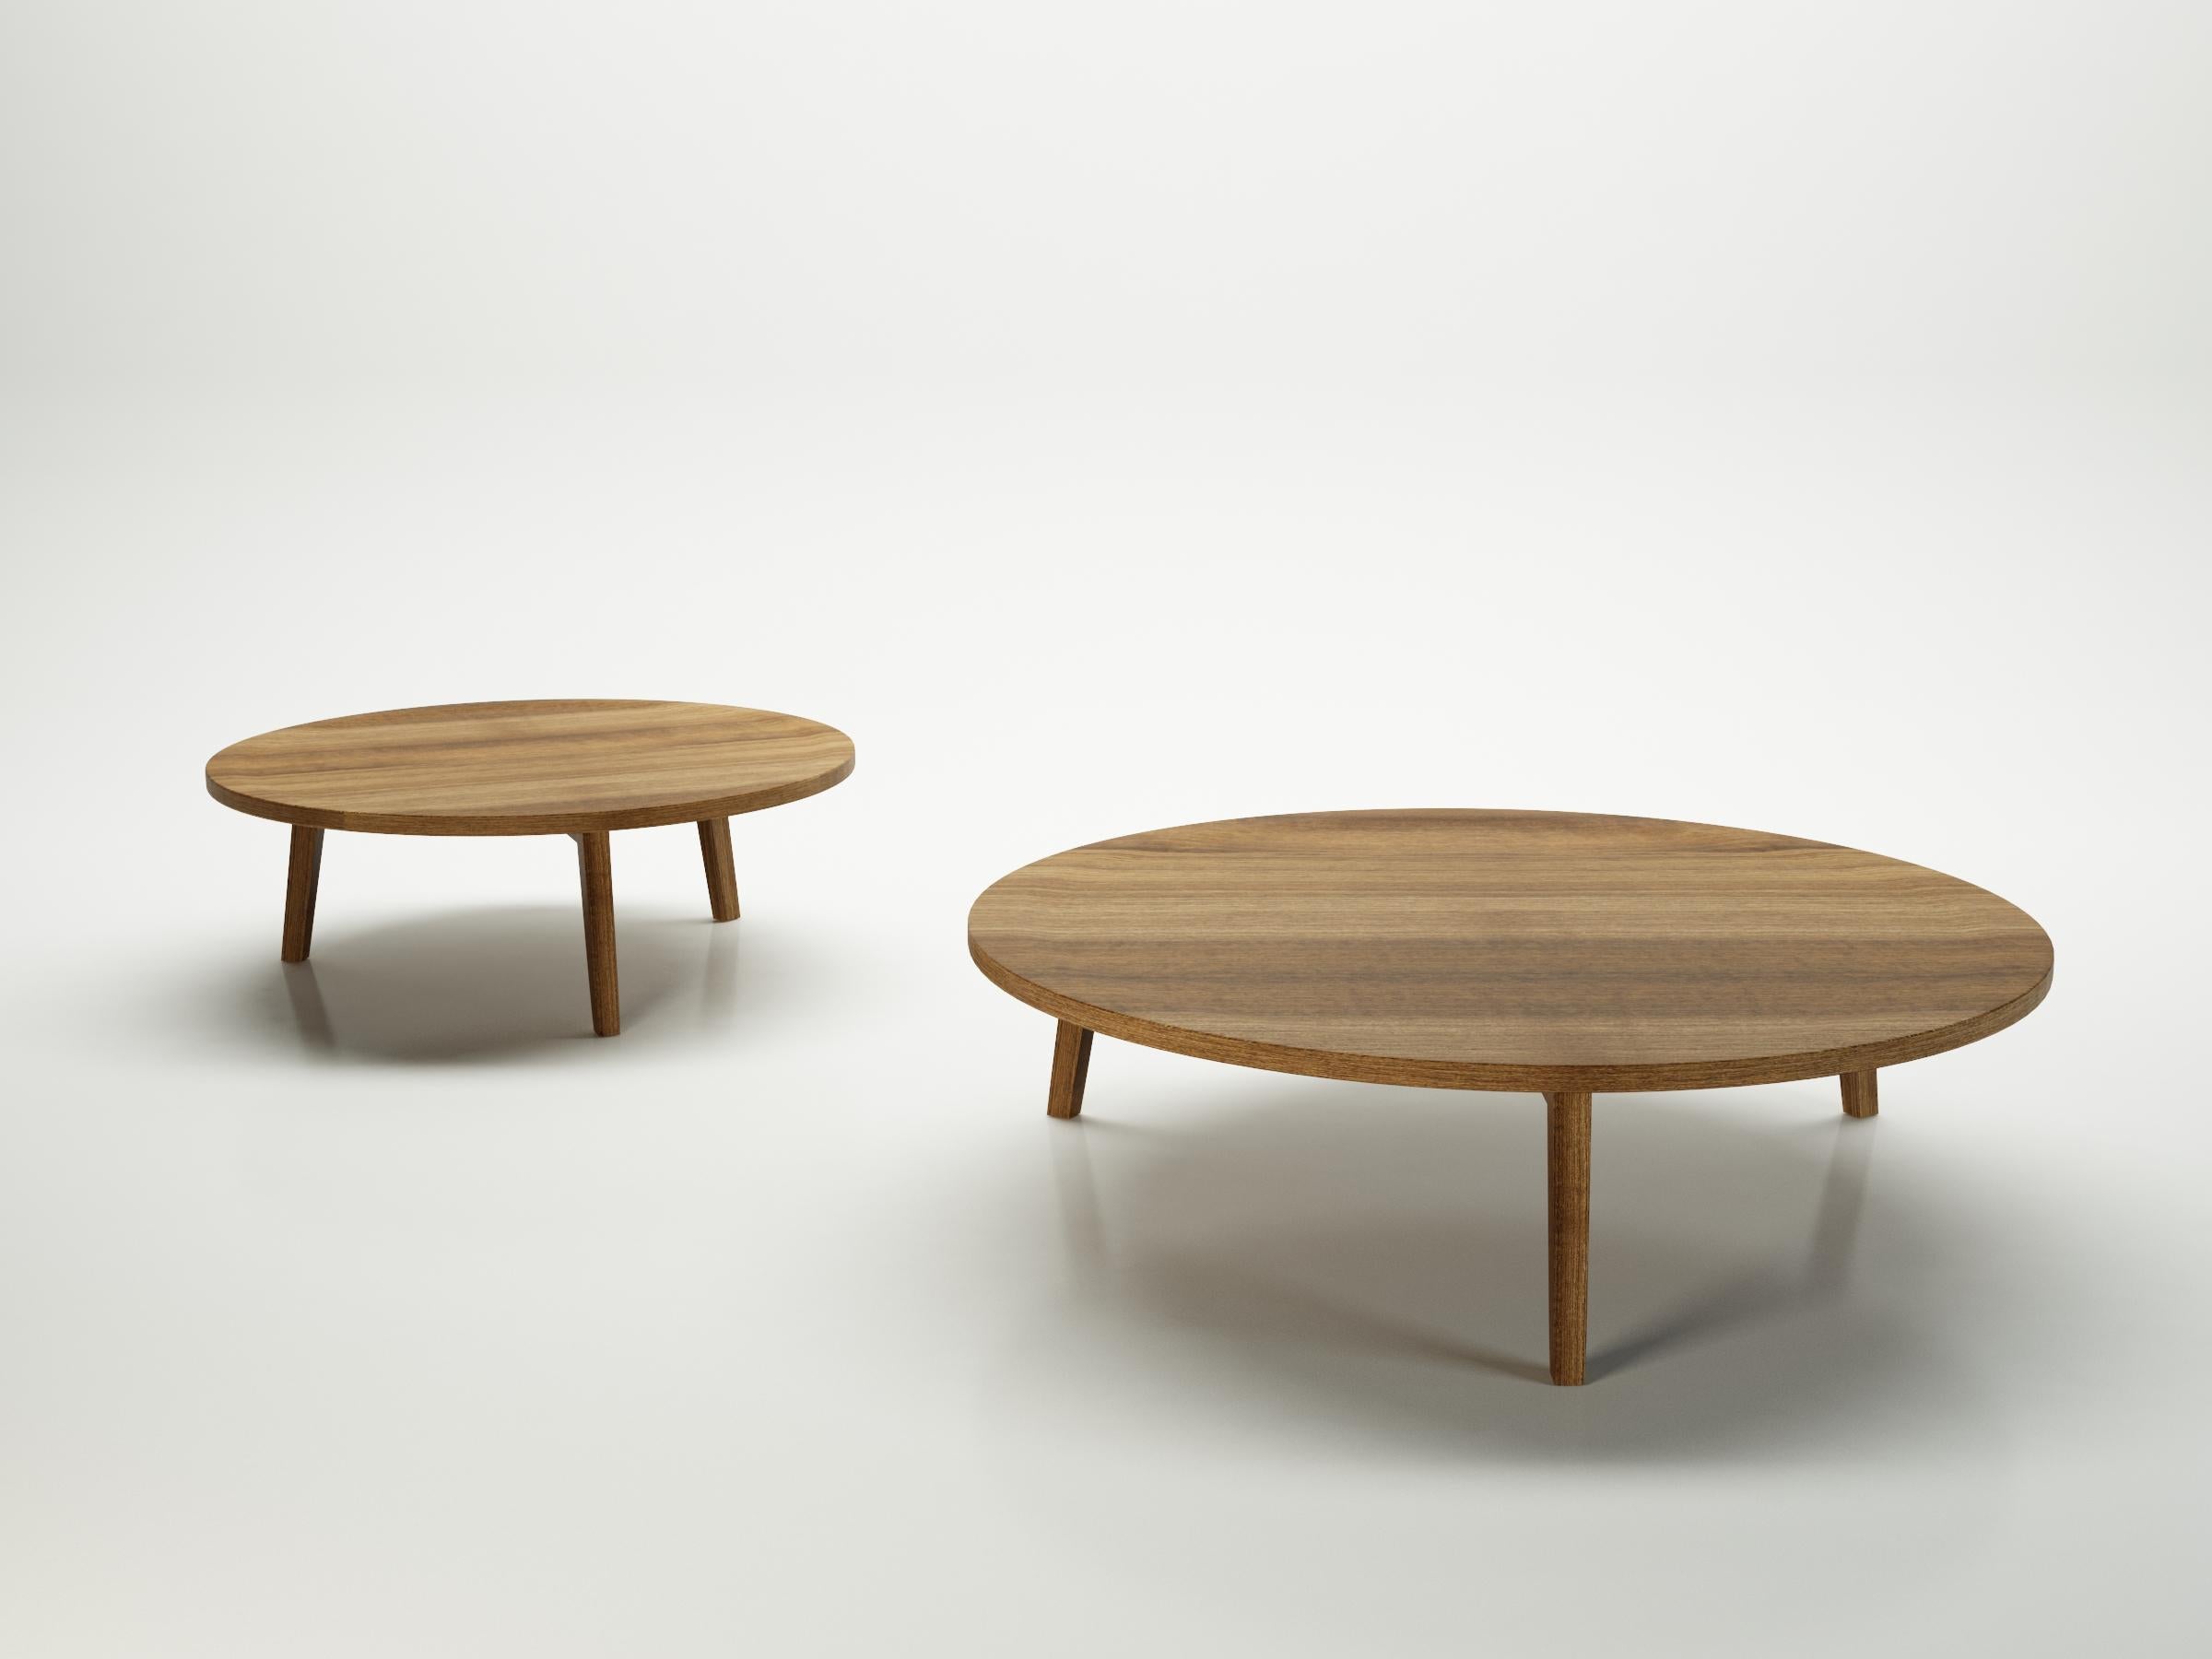 A family of three-legged coffee tables, Gray 46/46 R/49/49 R are characterised by a round top and clean and essential geometries. Available in two diameters, the top is available in solid walnut or oak. A peculiarity of these coffee tables is the